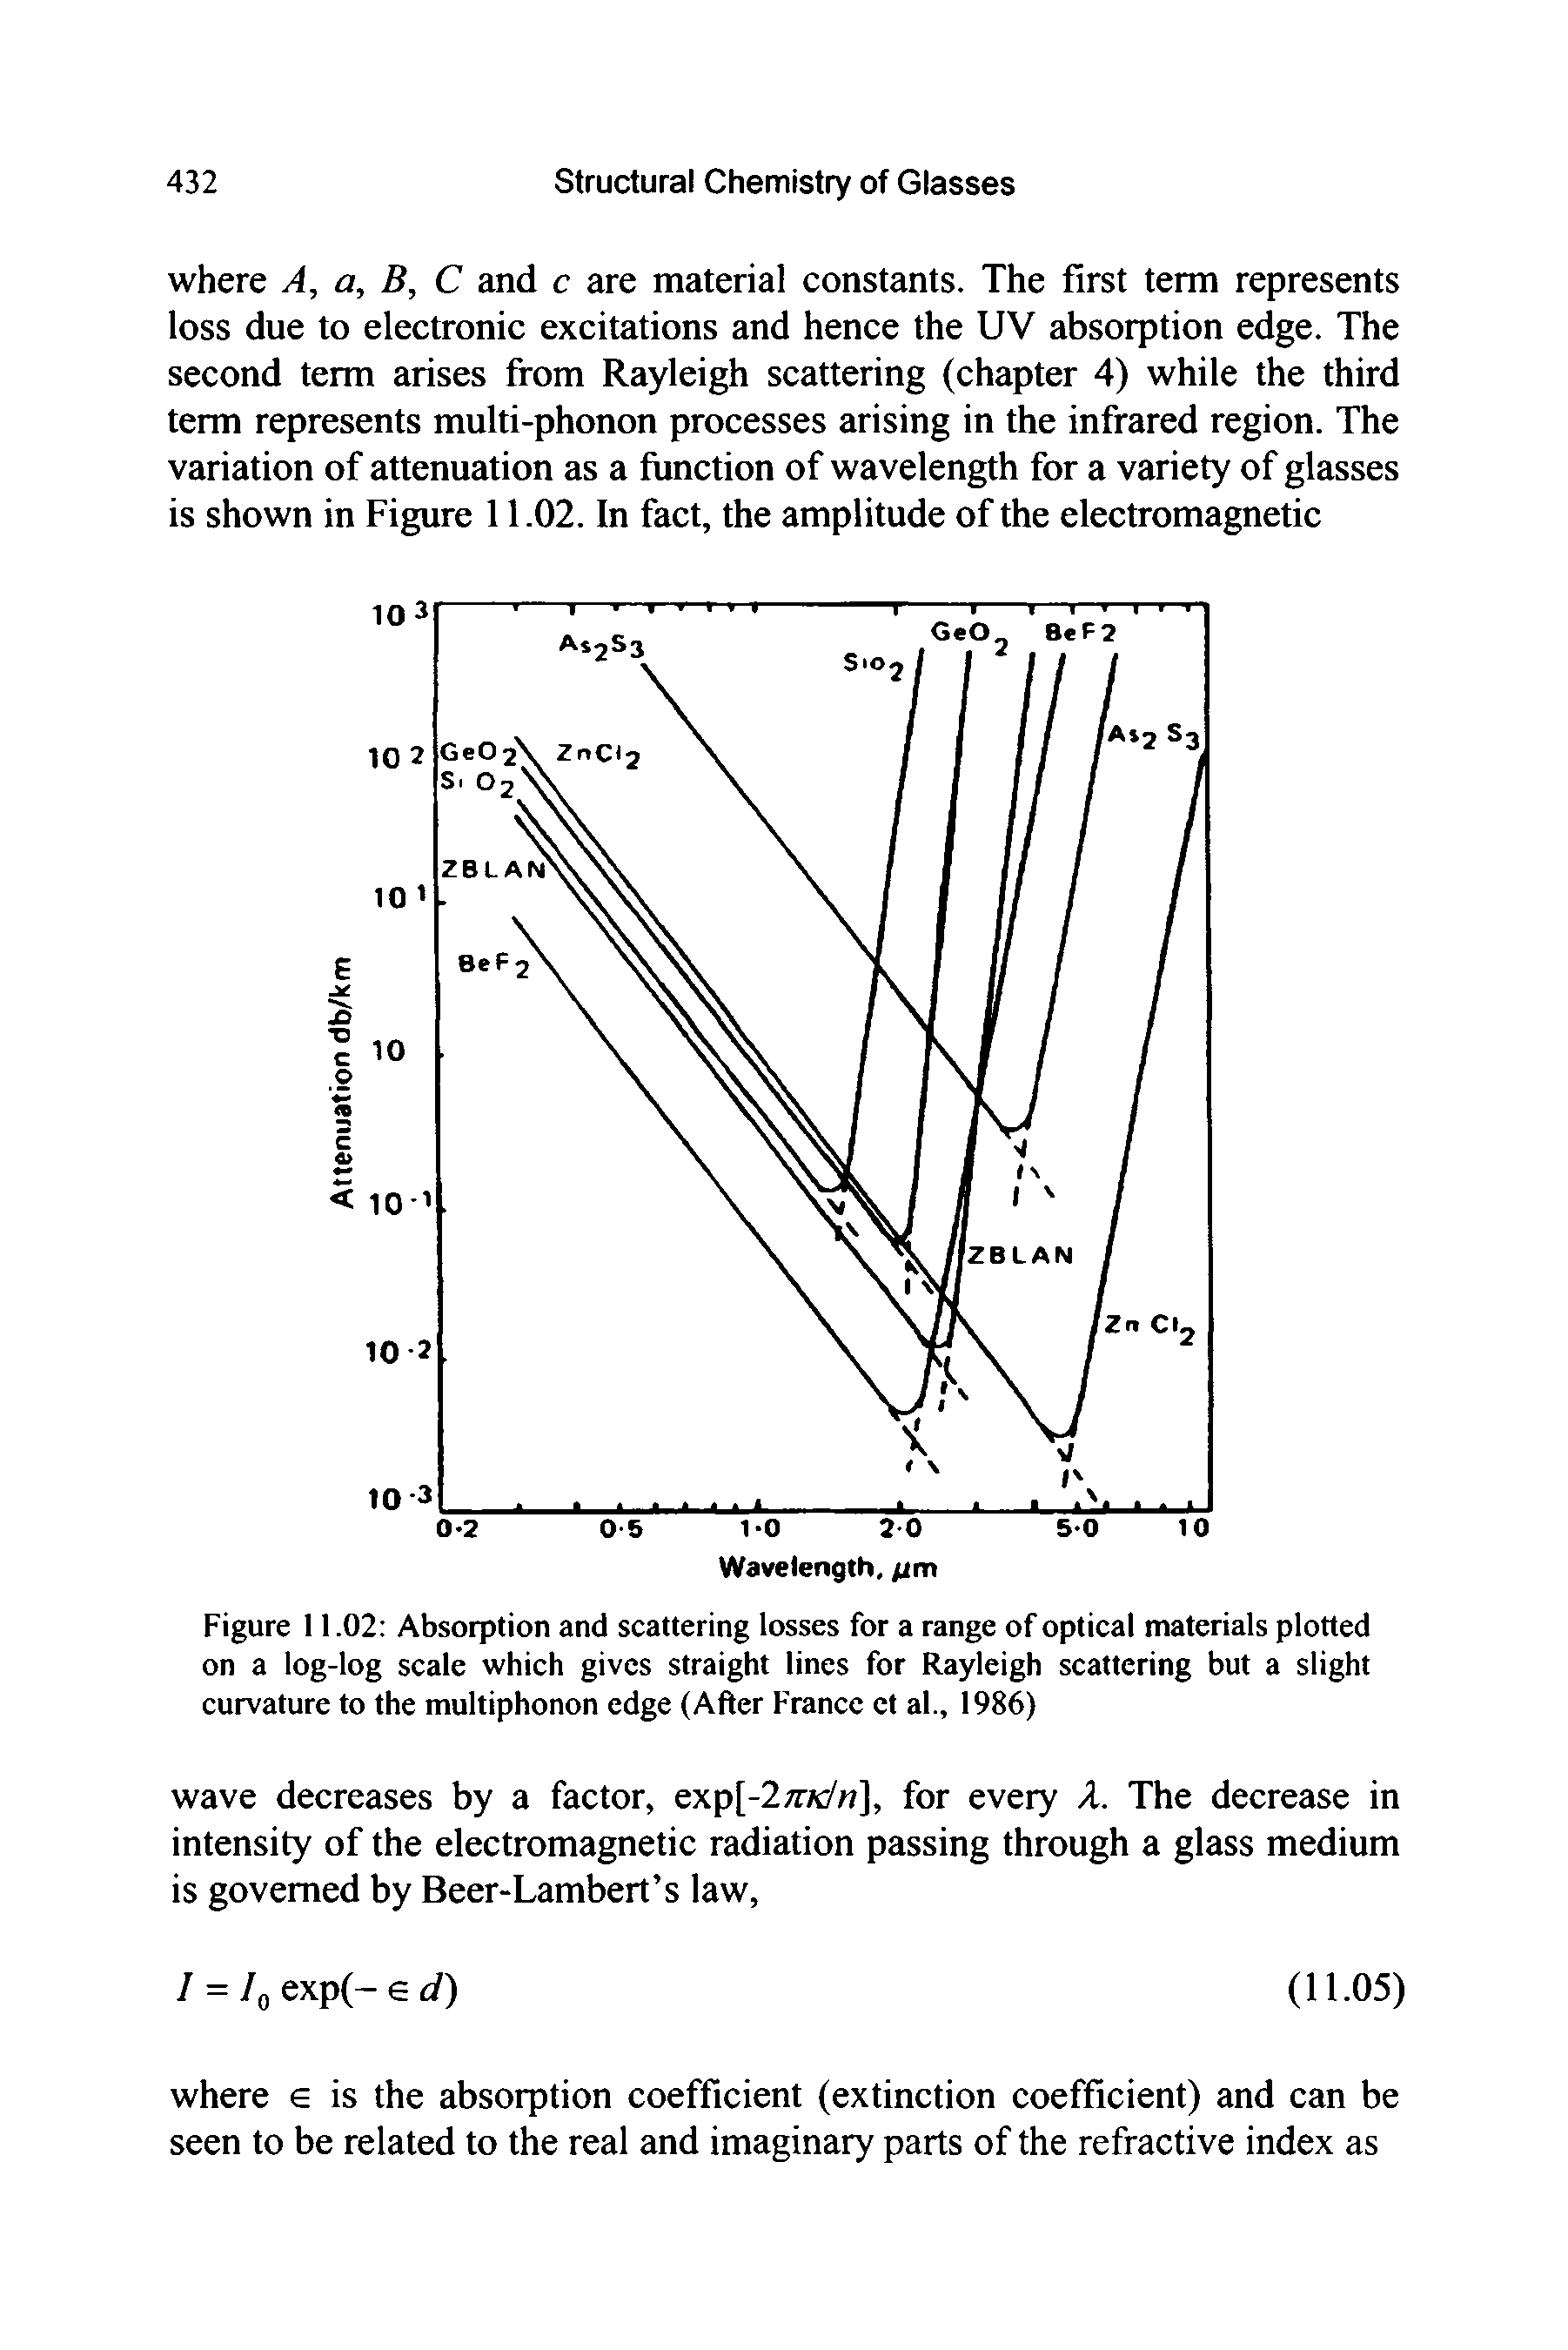 Figure 11.02 Absorption and scattering losses for a range of optical materials plotted on a log-log scale which gives straight tines for Rayleigh scattering but a slight curvature to the multiphonon edge (After France ct al., 1986)...